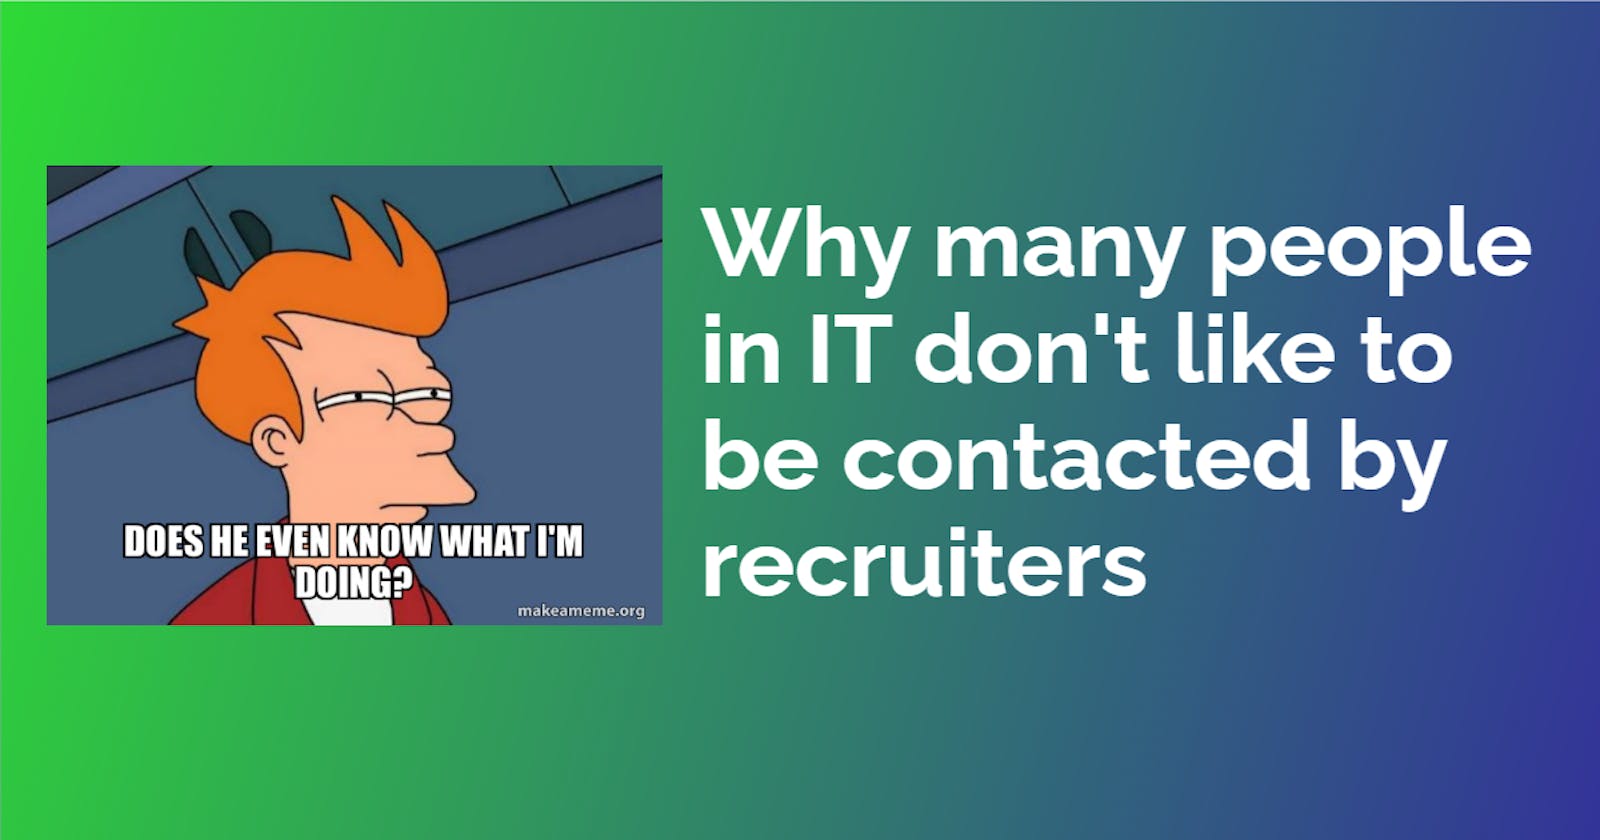 Why many people in IT don't like to be contacted by recruiters